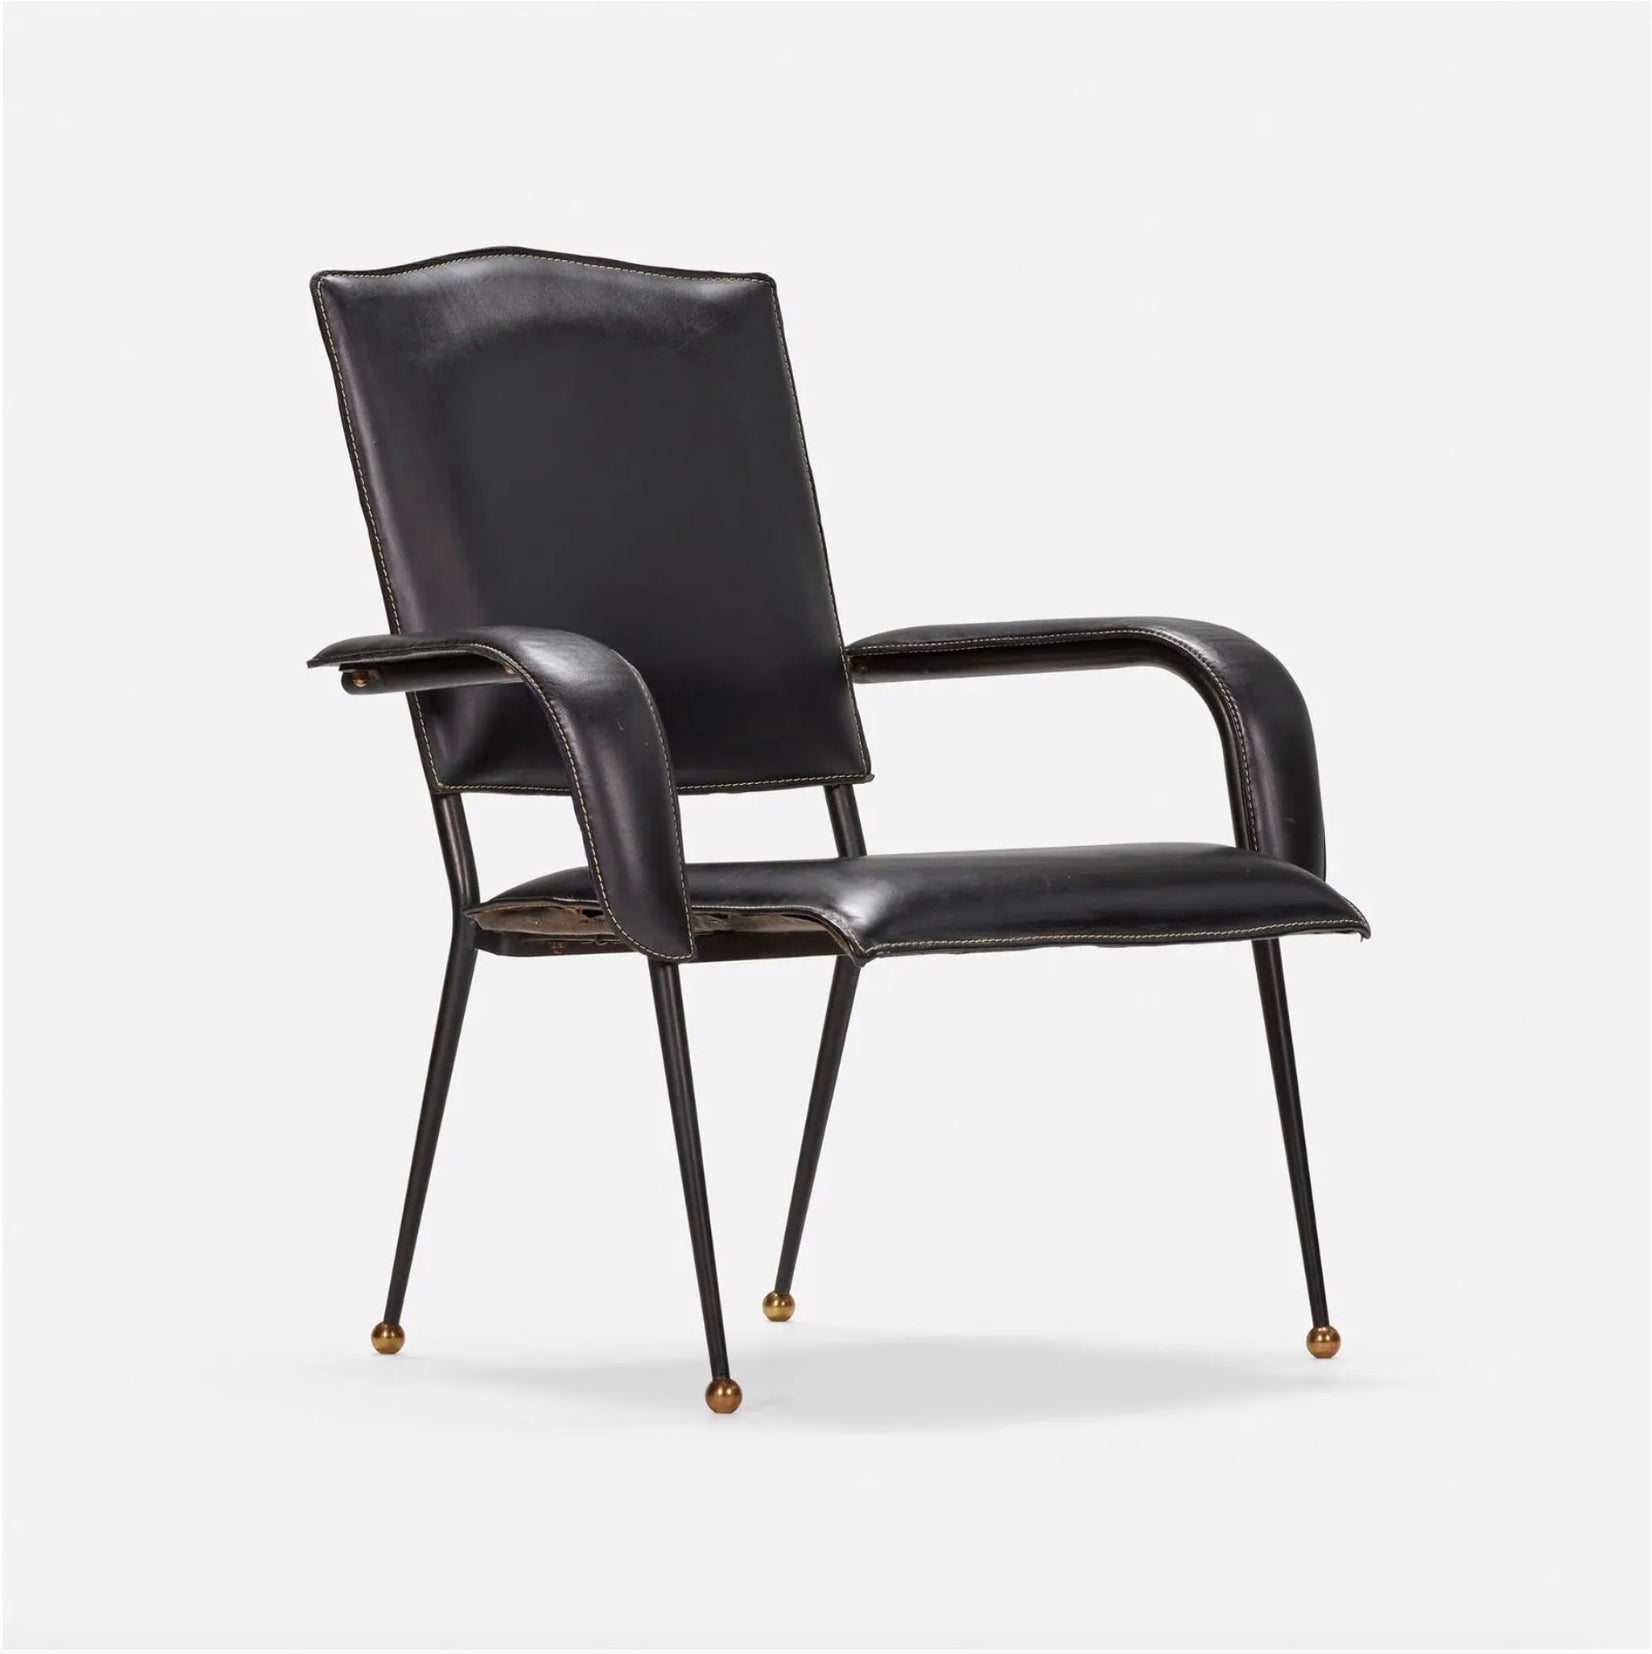 Jacques Adnet Black Leather Armchair, 1950s France